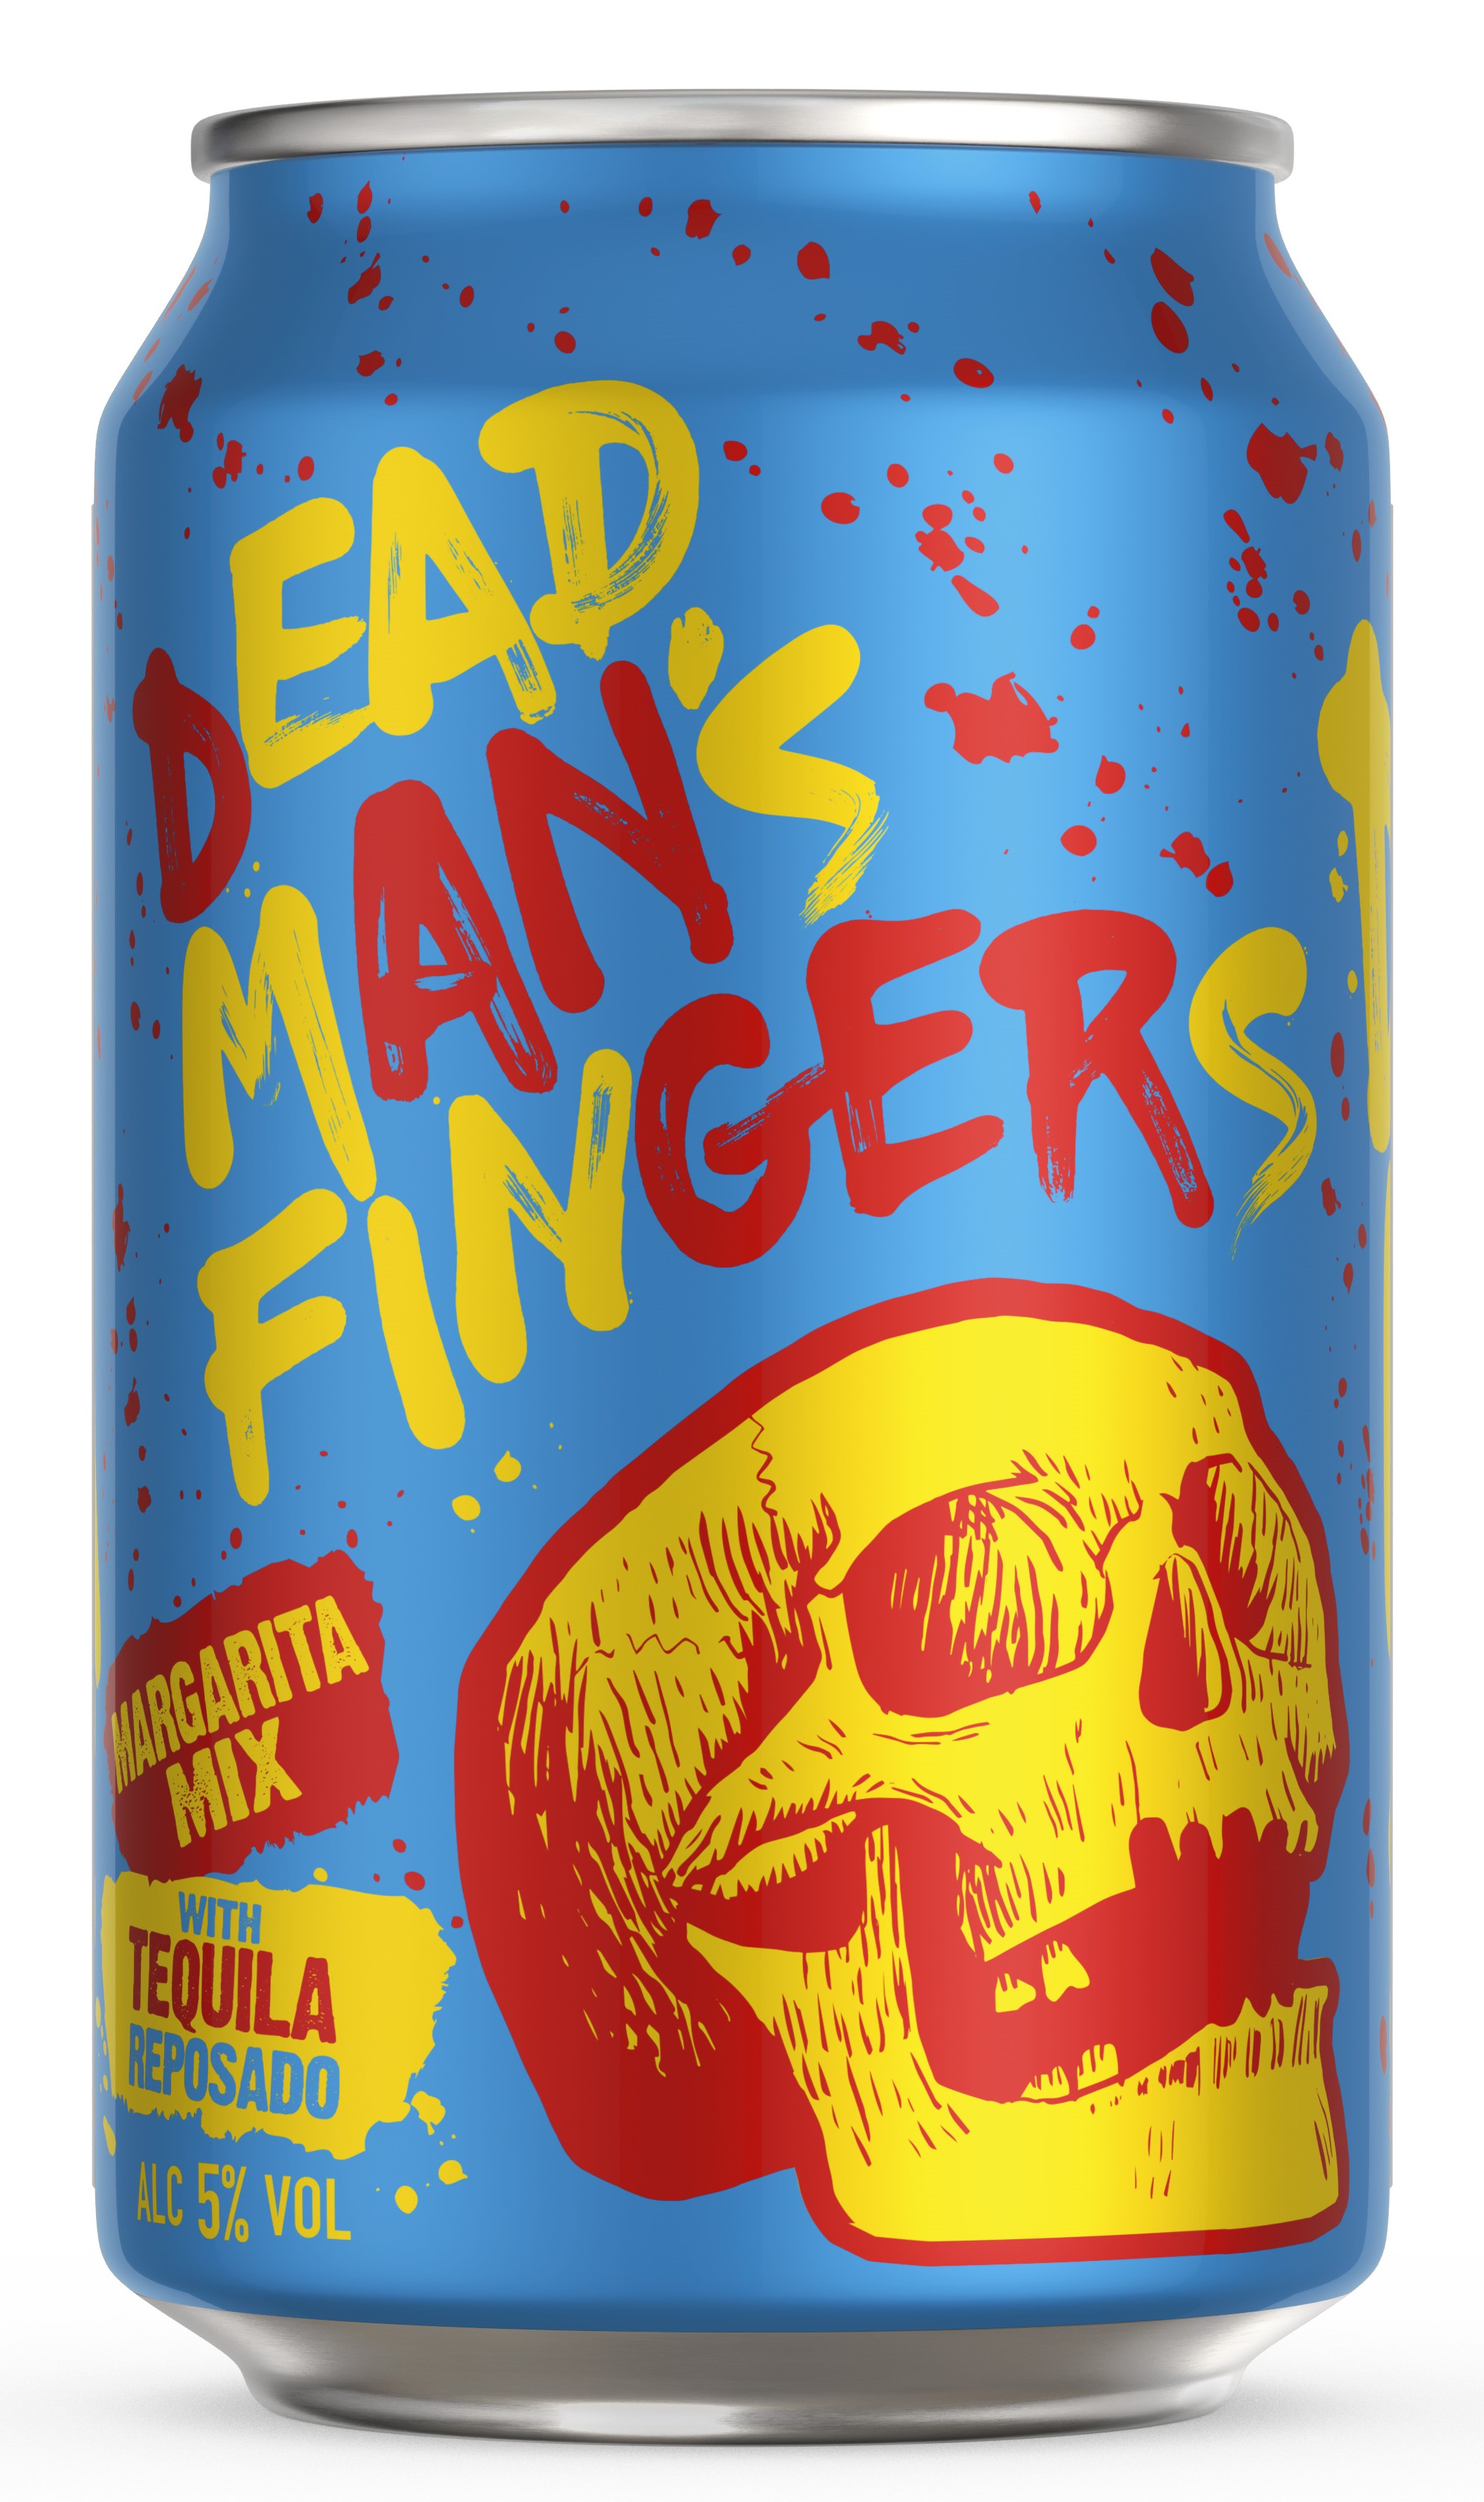 DEAD MAN FINGER MARGARITA MIX WITH TEQUILA CANS 5% 12 x 330ml